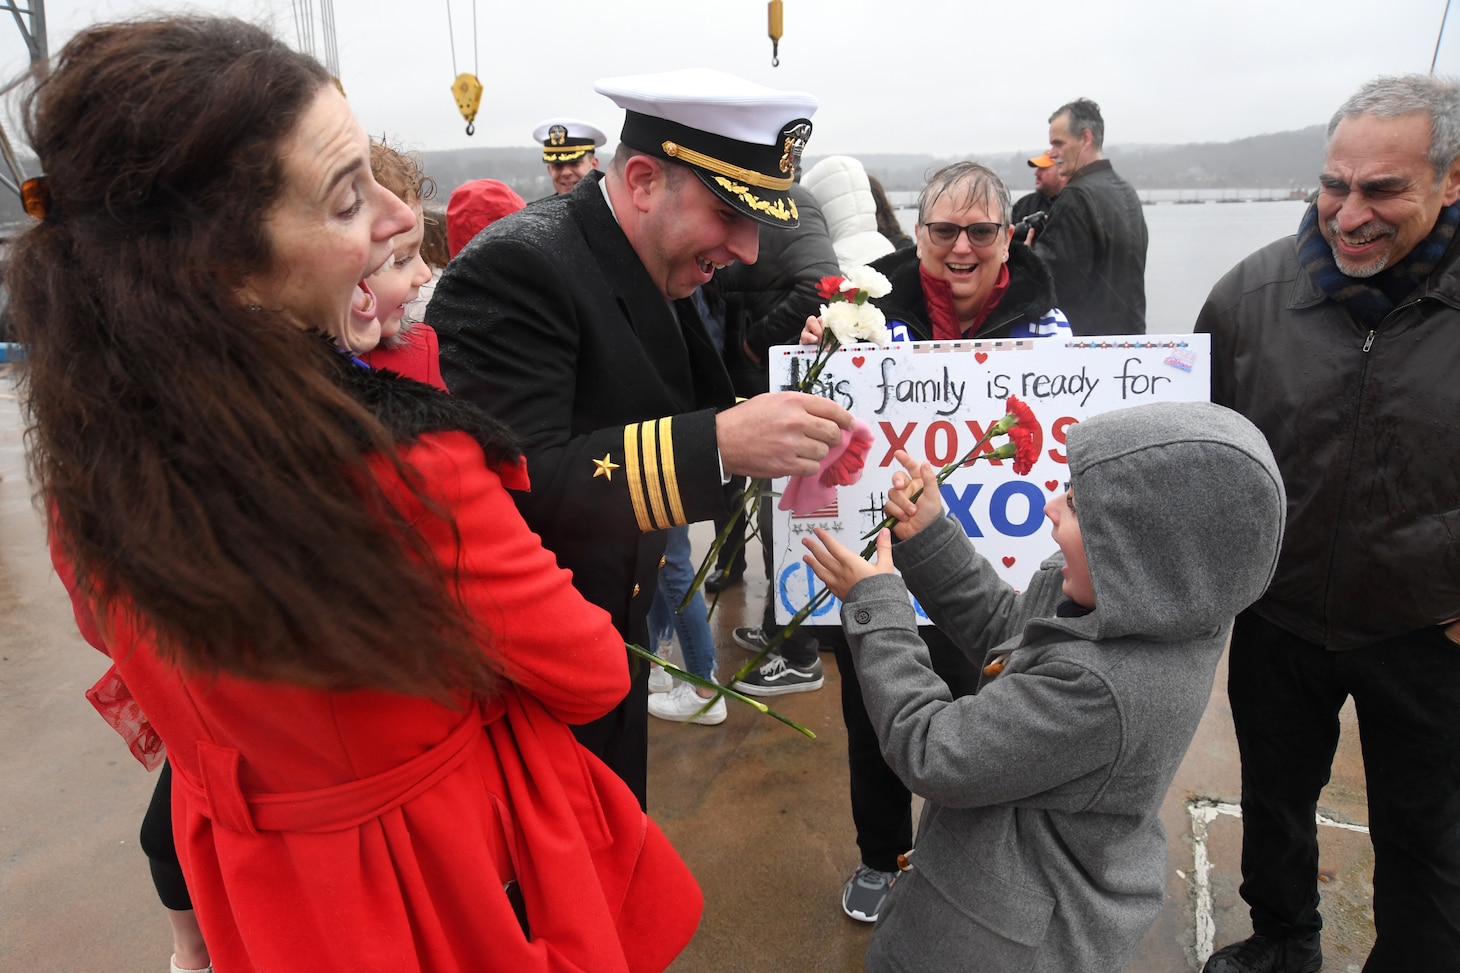 Cmdr. Matthew Lewis, executive officer attached to the for the USS Newport News (SSN 750), reunites with his family during a homecoming event at Naval Submarine Base New London in Groton, Conn., Jan. 3. Newport News returned to homeport after a six-month deployment in support of the chief of naval operations’ maritime strategy. The Los Angeles-class fast-attack submarine USS Newport News and crew operate under Submarine Squadron (SUBRON) TWELVE and its primary mission is to provide attack submarines that are ready, willing, and able to meet the unique challenges of undersea combat and deployed operations in unforgiving environments across the globe.